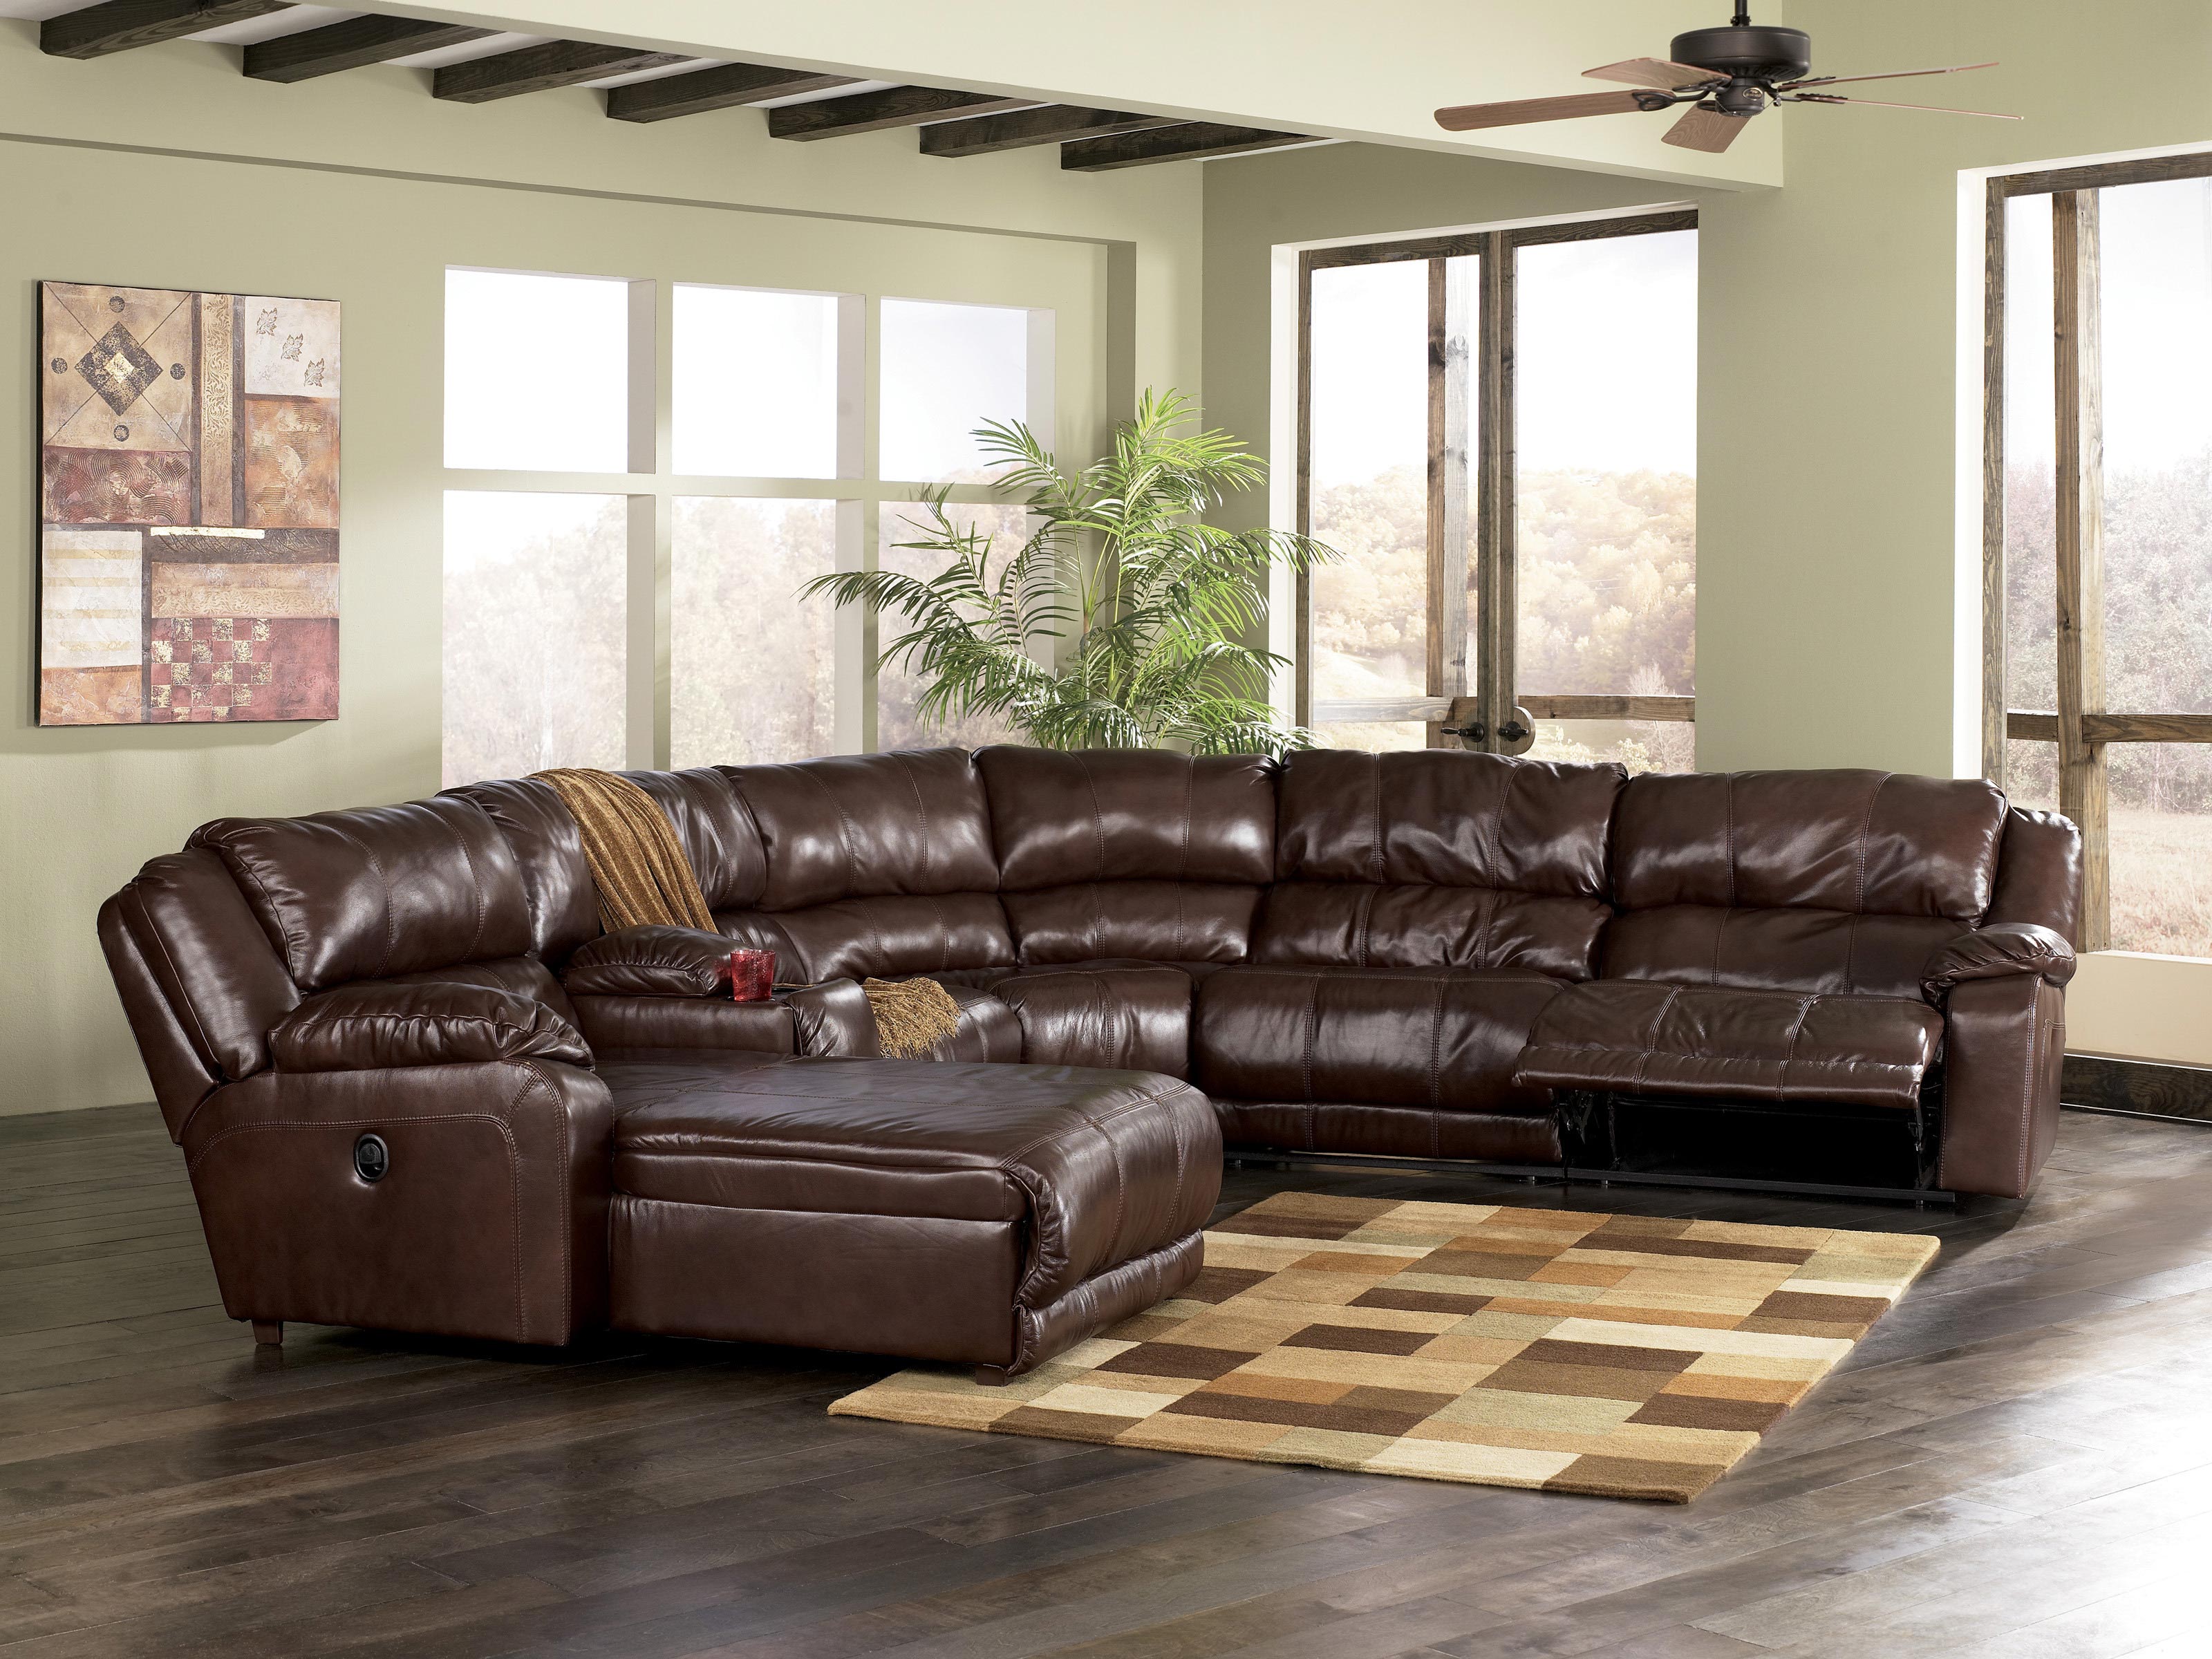 Living Room Ideas With Black Leather Couch